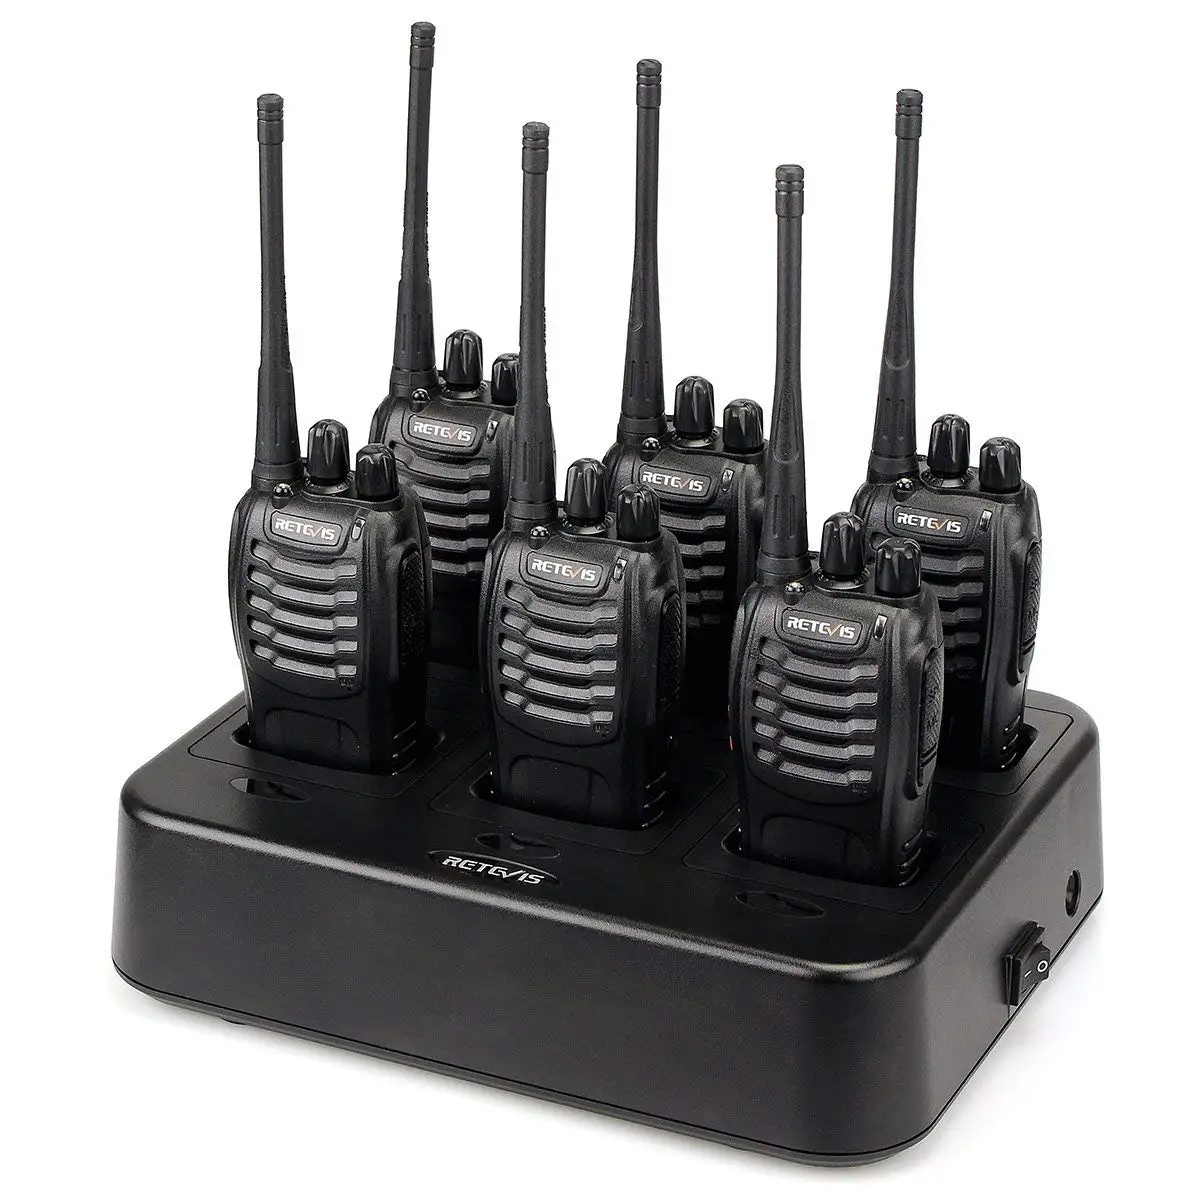 

Retevis H777 Walkie Talkie 5W CTCSS/DCS UHF400-470MHz 16CH FM Two Way Radio with six way Rapid Charger